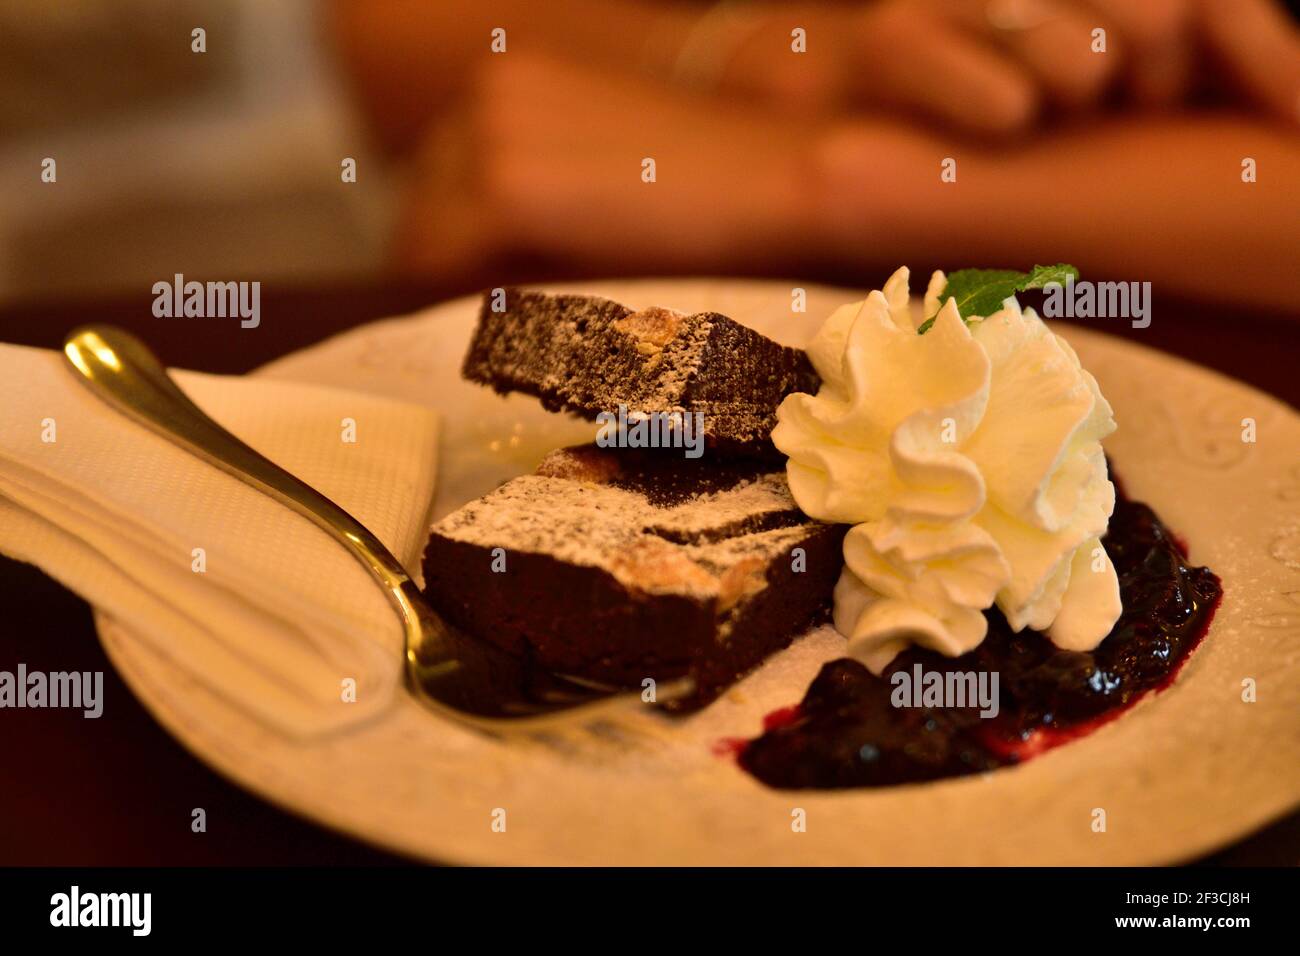 Restaurant food with fresh ingredients - chocolate cake with whipped cream and coffee in the background Stock Photo